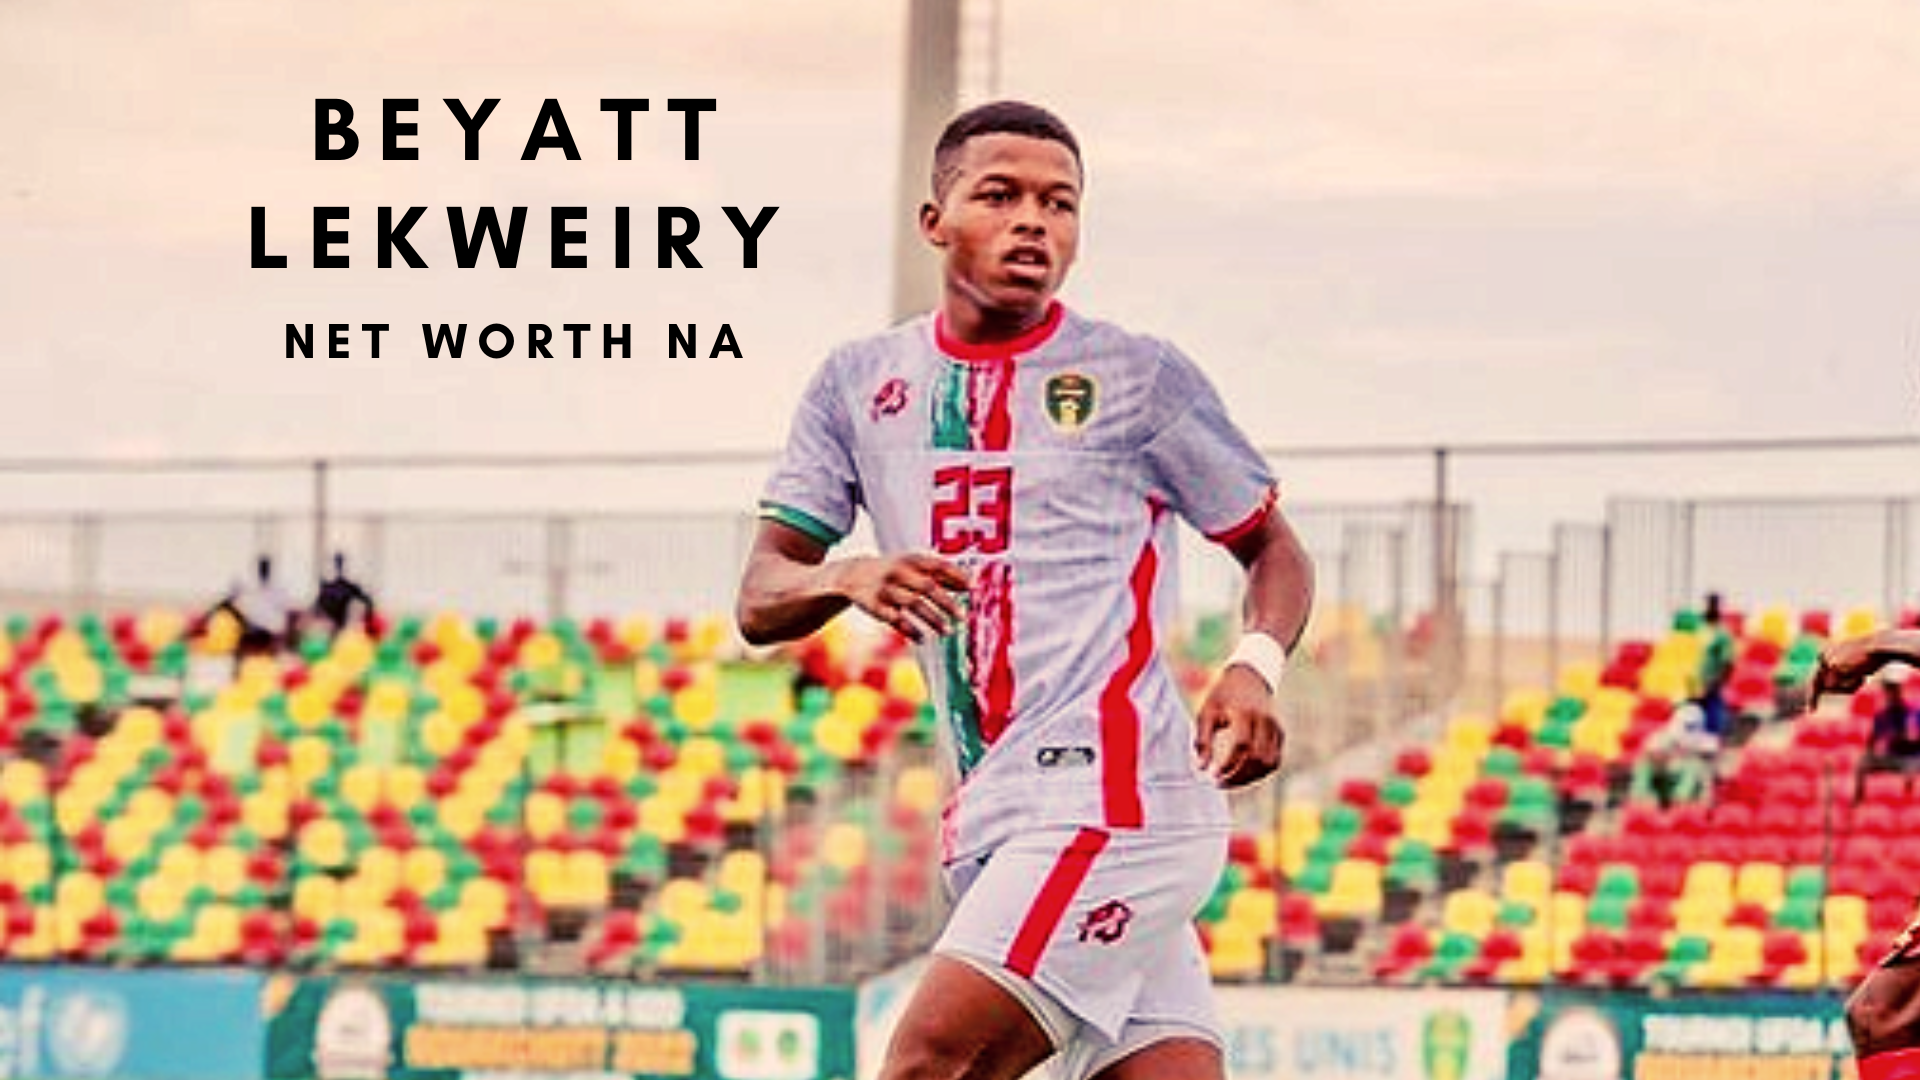 Beyatt Lekweiry is an Mauritanian professional footballer who plays as a midfielder for AS Douanes, and the Mauritania national team. . (Credits: @beyat_lekwery10 Instagram)